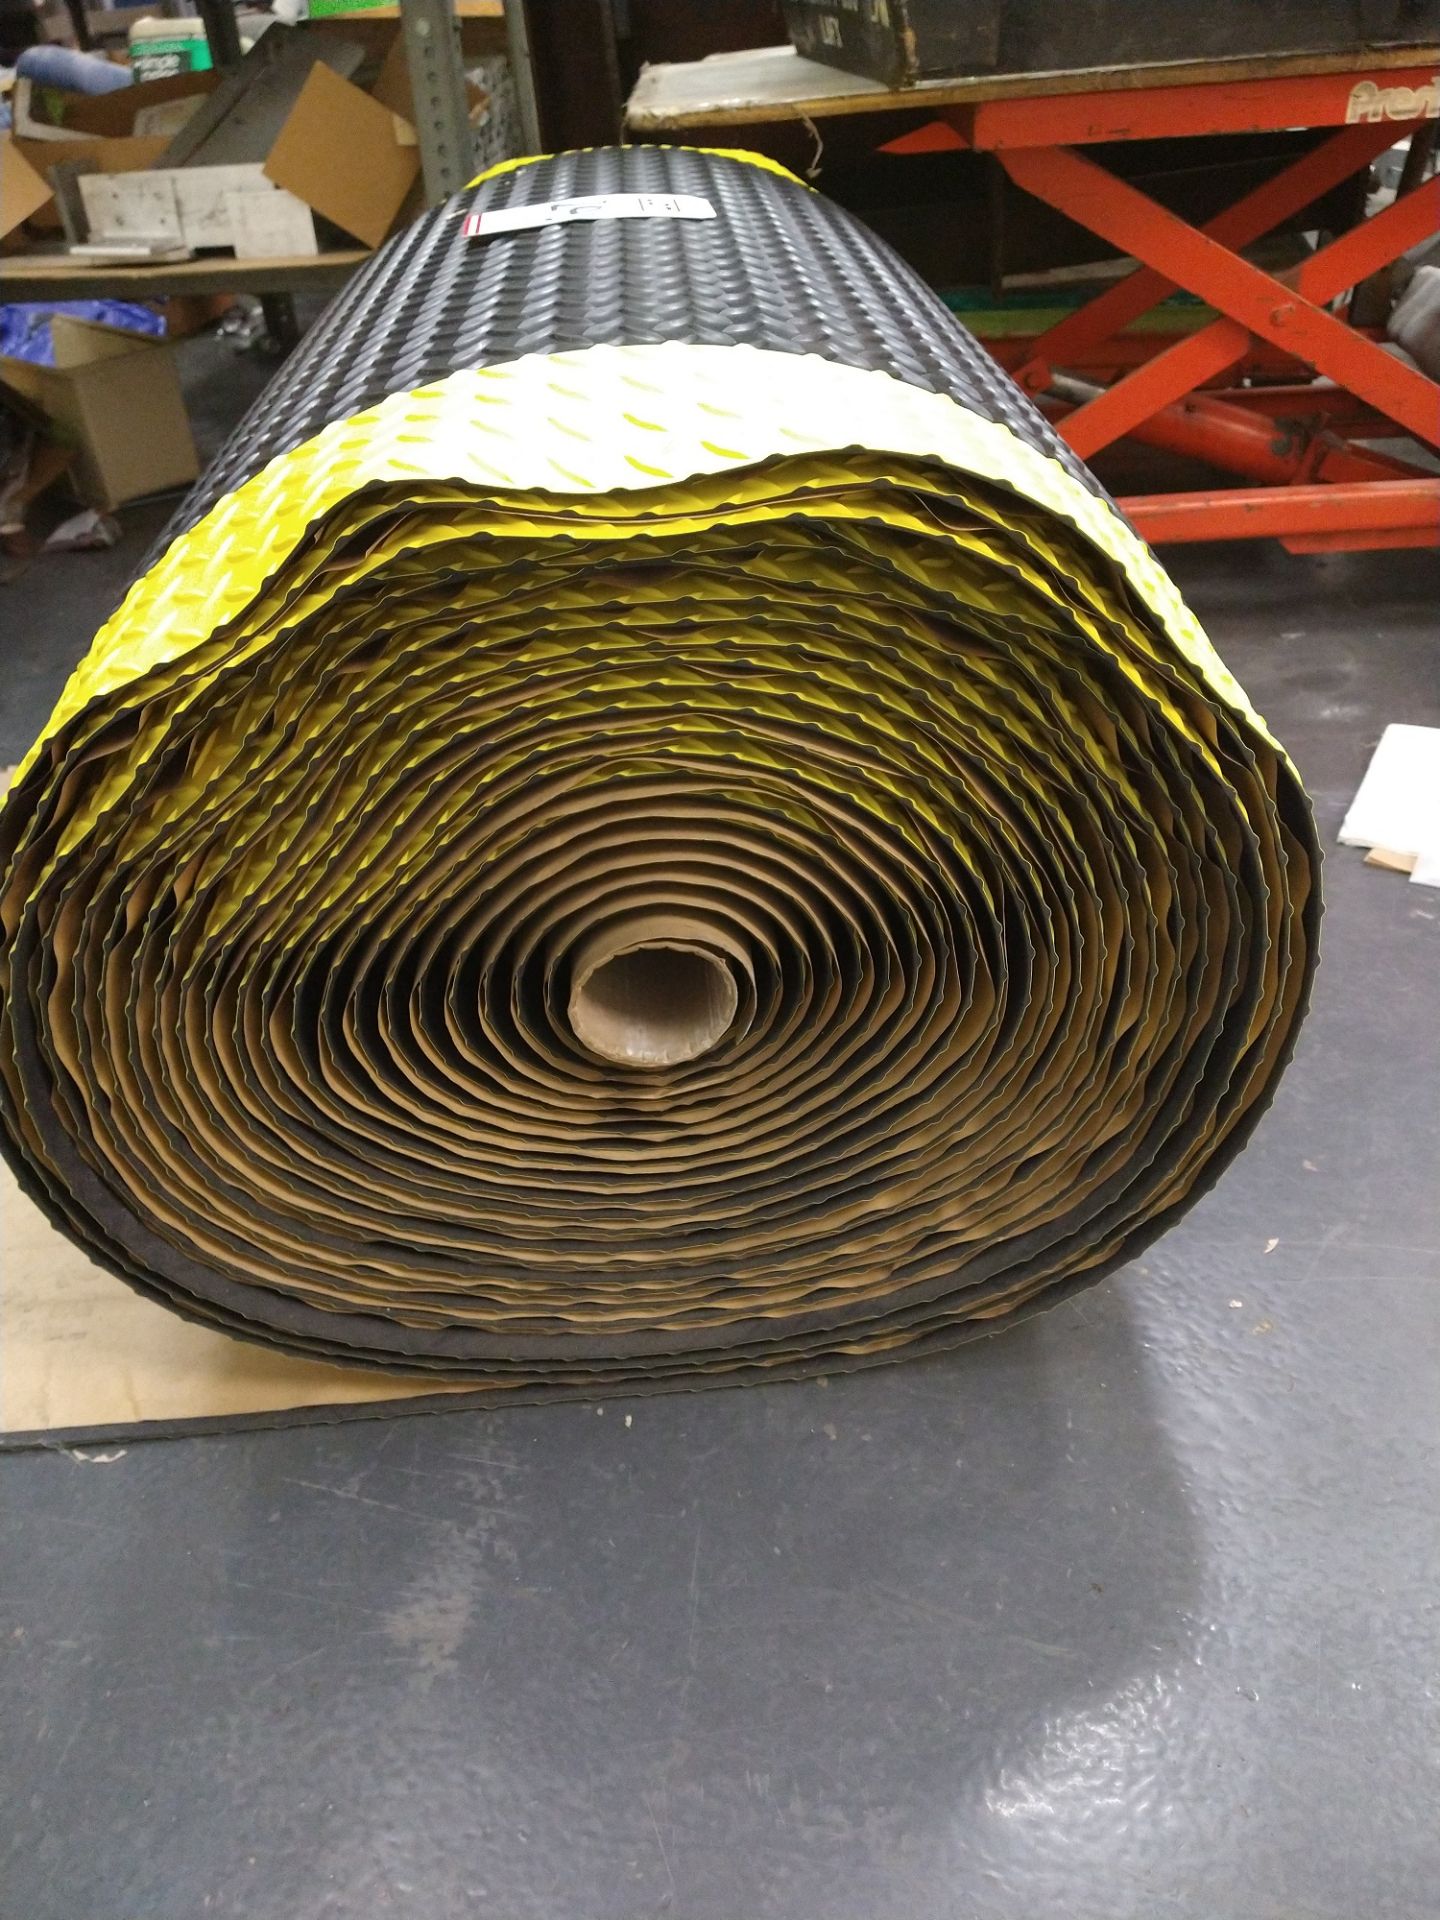 3' ROLL OF ANTI-SLIP ANTI-FATIGUE RUBBER MAT (LOCATION: BUILDING 2) - Image 2 of 2